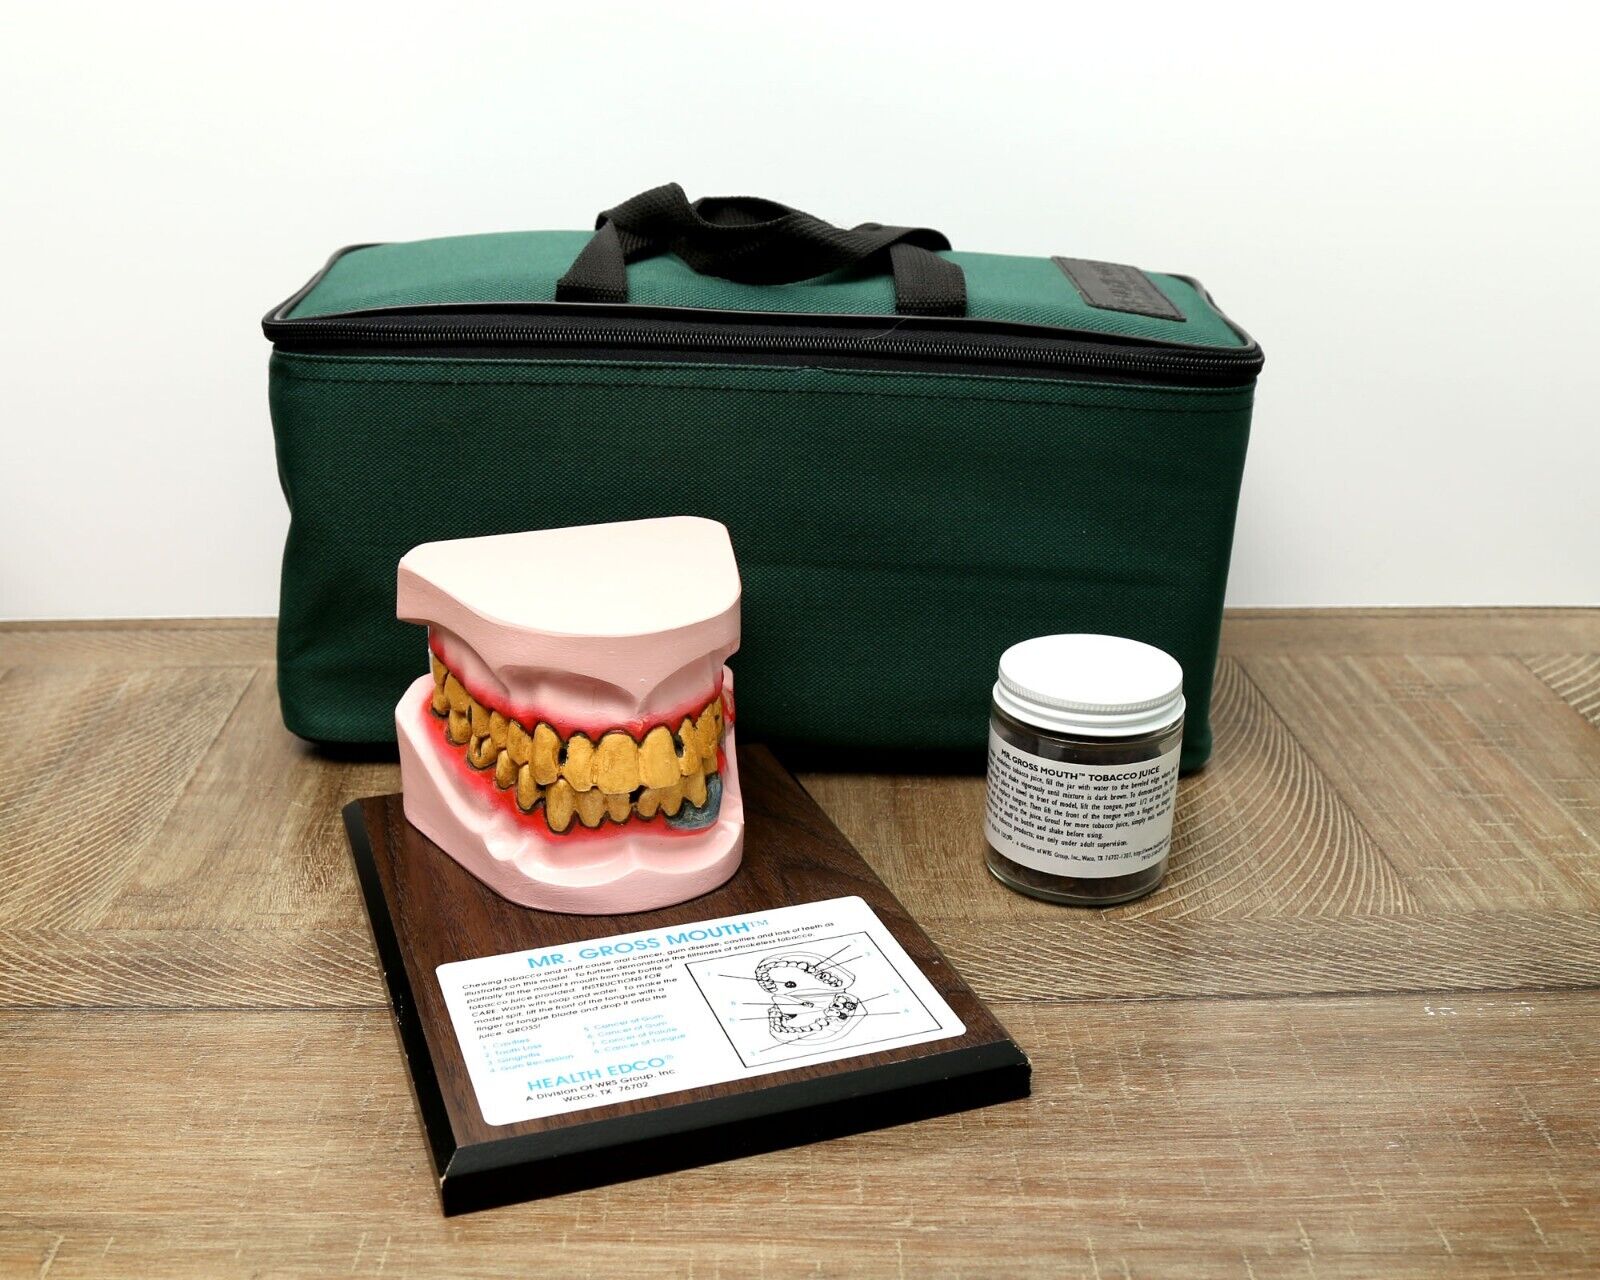 Health Edco Smokeless Tobacco Mouth Medical Model and Case